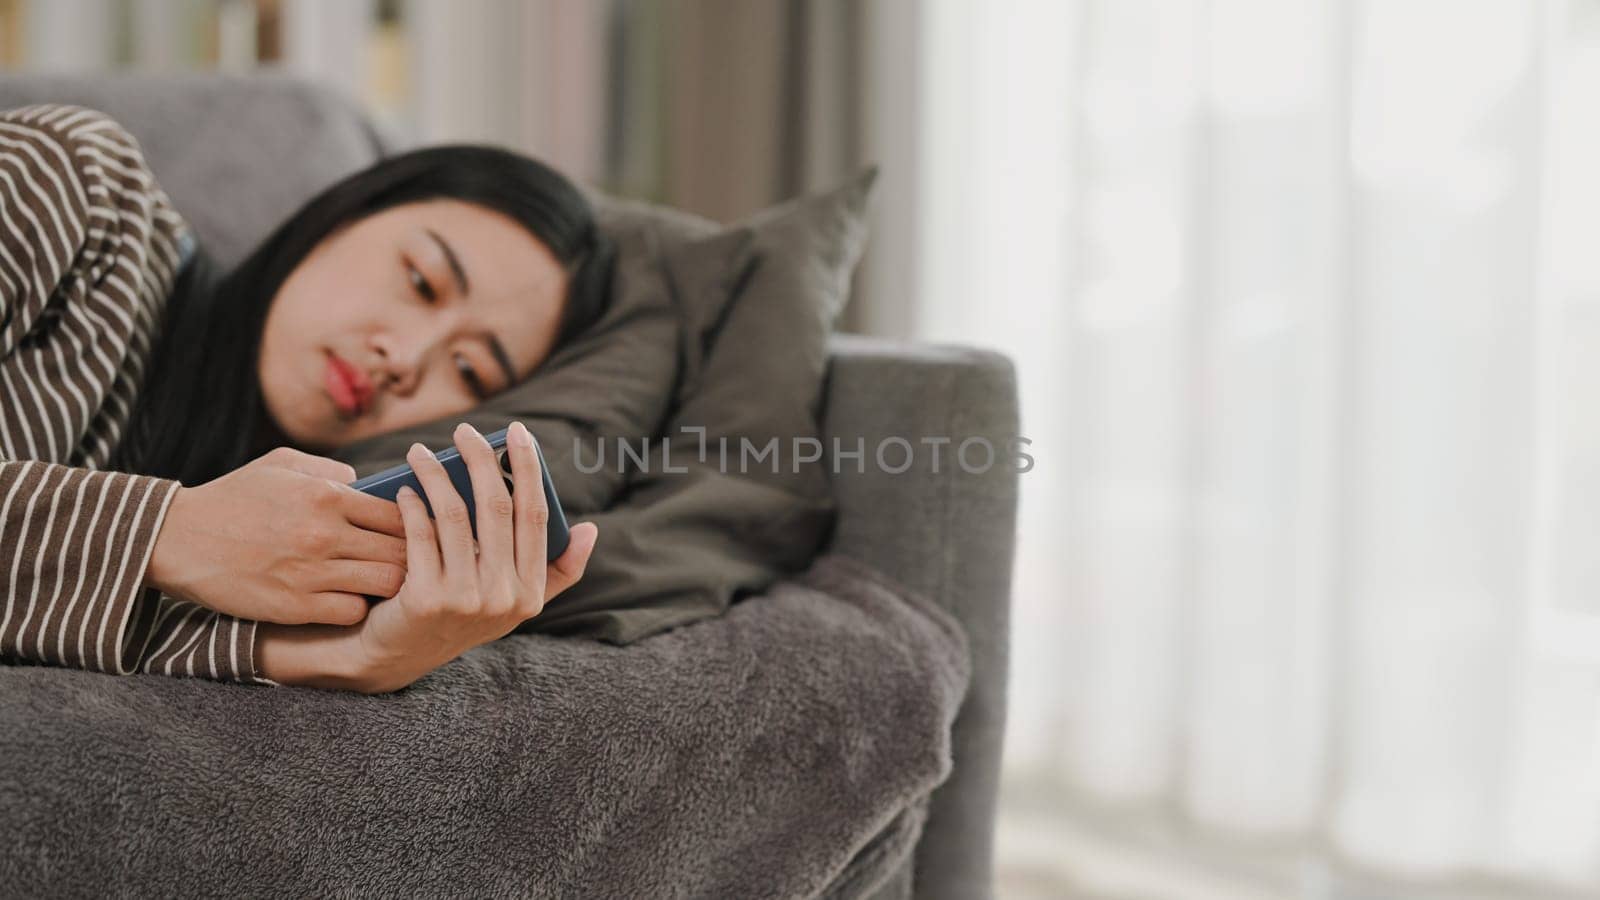 Bored young woman in casual clothes using mobile phone while lying on sofa at home. People lifestyle concept.